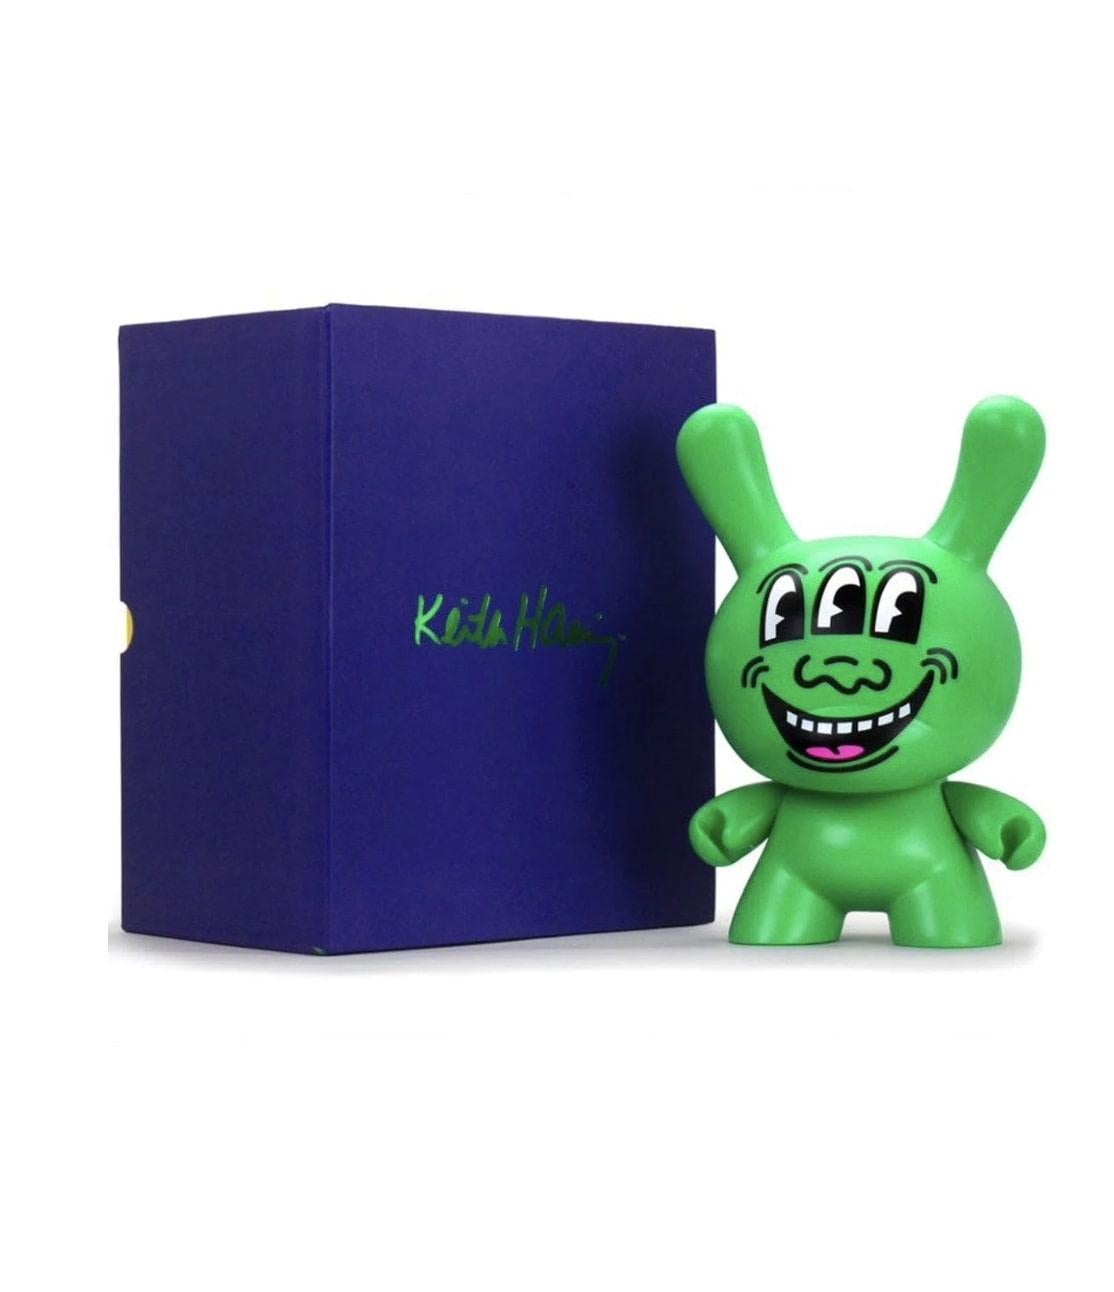 (after) Keith Haring Figurative Sculpture - Kidrobot - Keith Haring Masterpiece Three Eyed Face 8" Dunny Art Figure